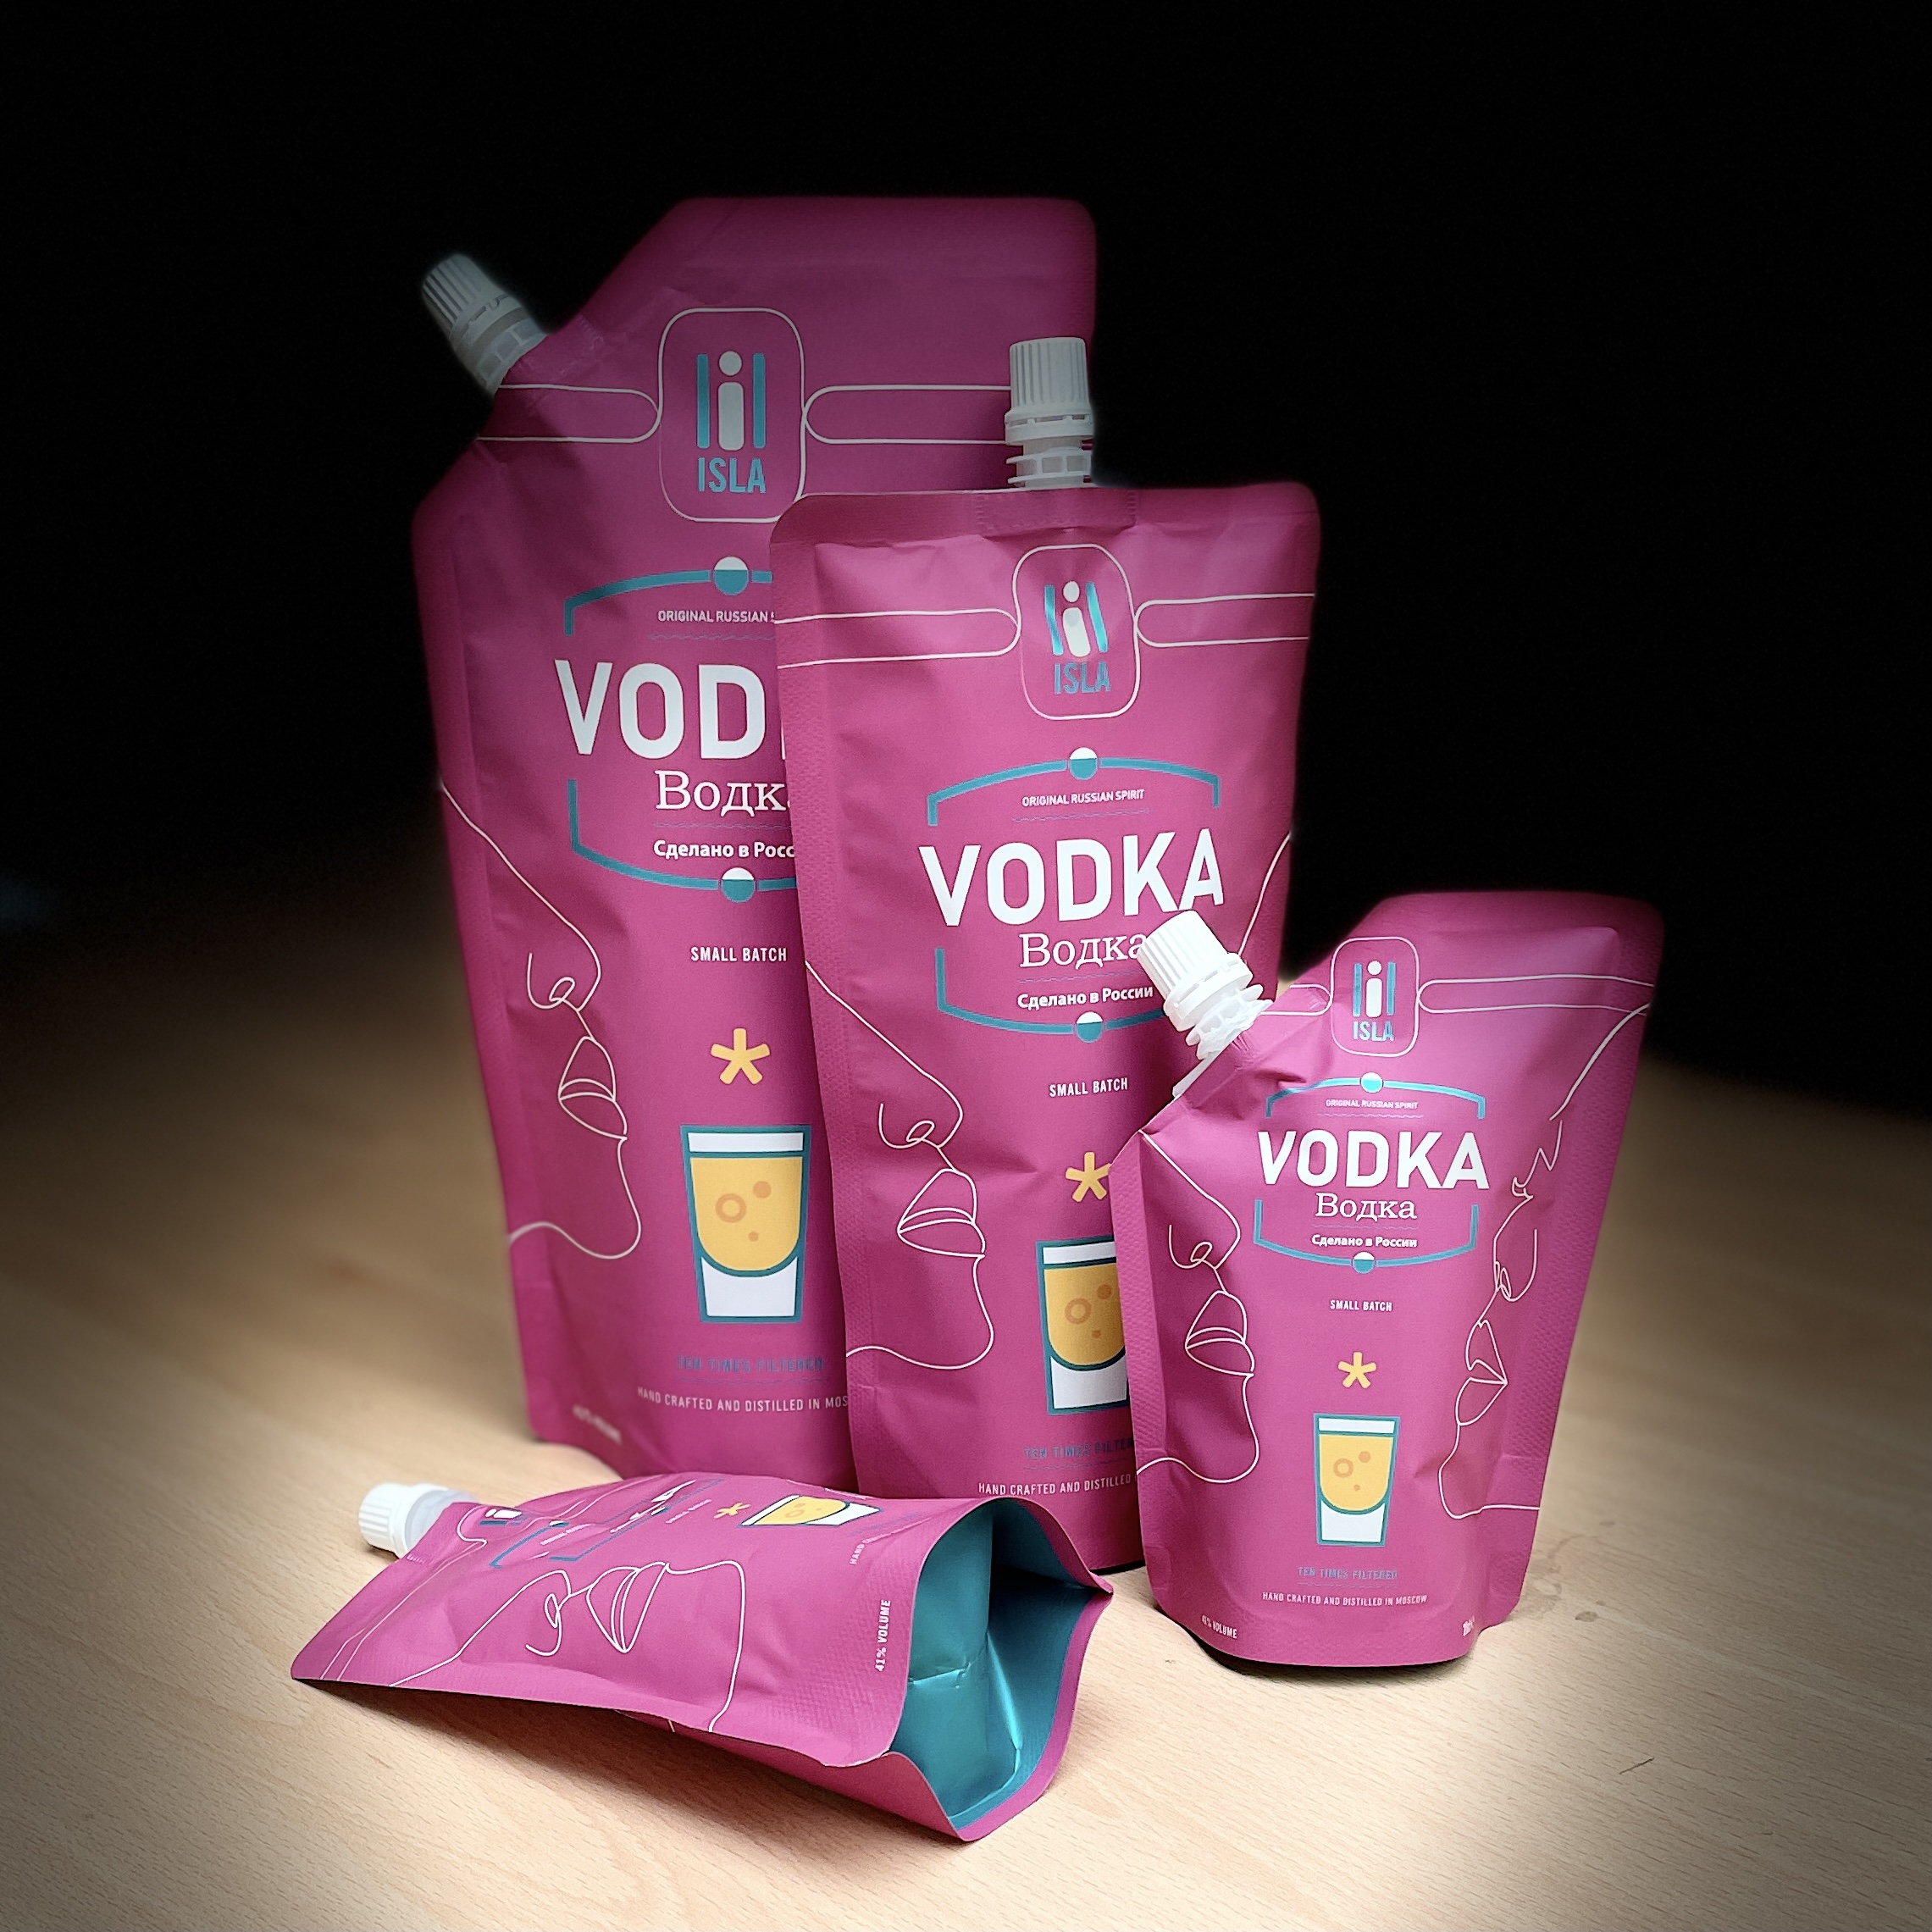 Various sizes of spouted pouches for vodka